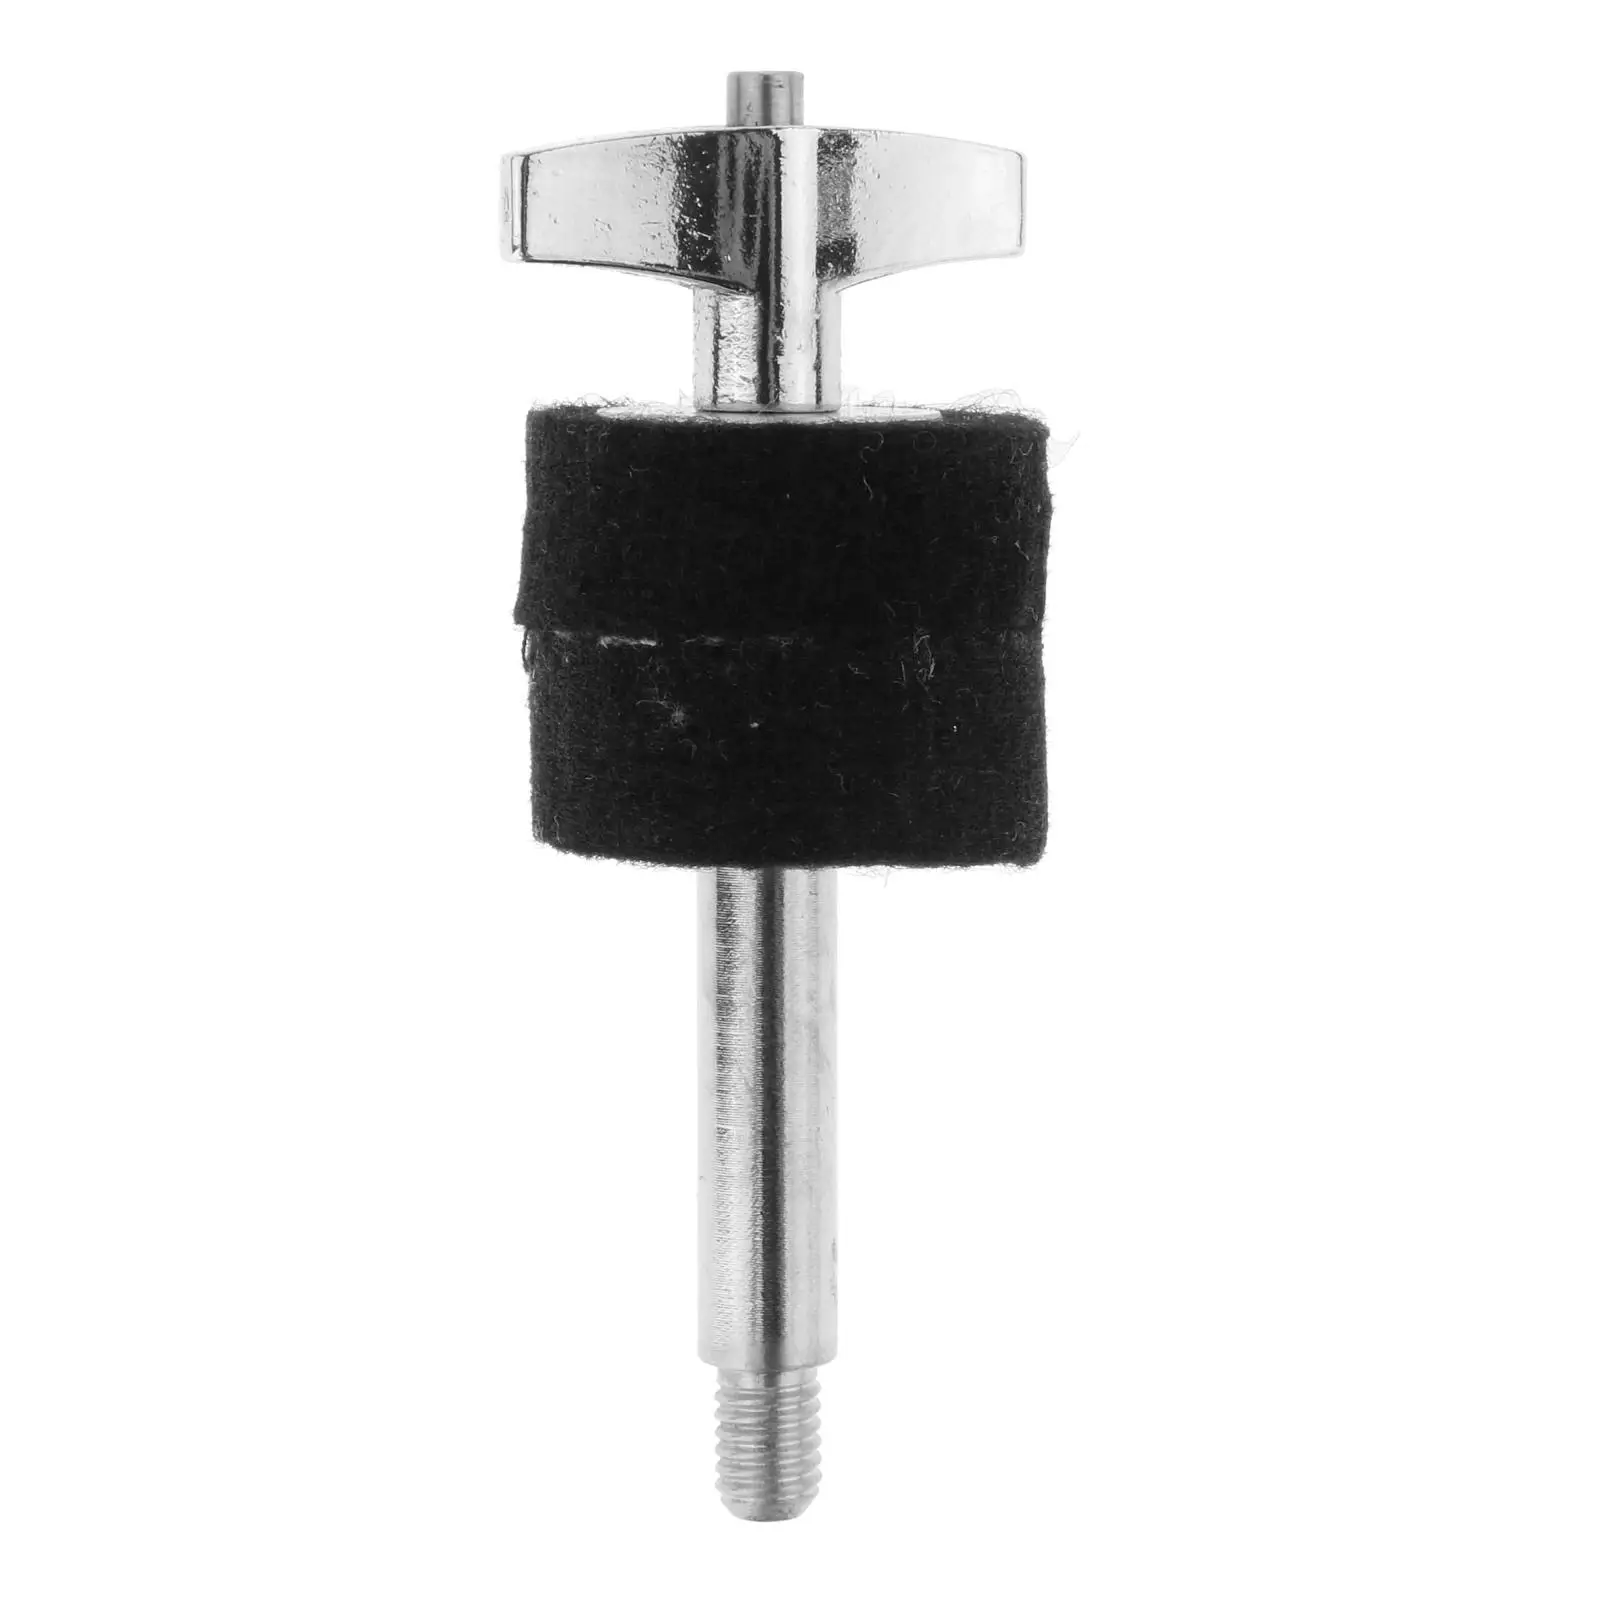 Cymbal Stacker Attachment Replacement Parts Heavy Duty Steel Hi Hat Cymbal Clutch Stand Post for Instrumental Music Jazz Drum